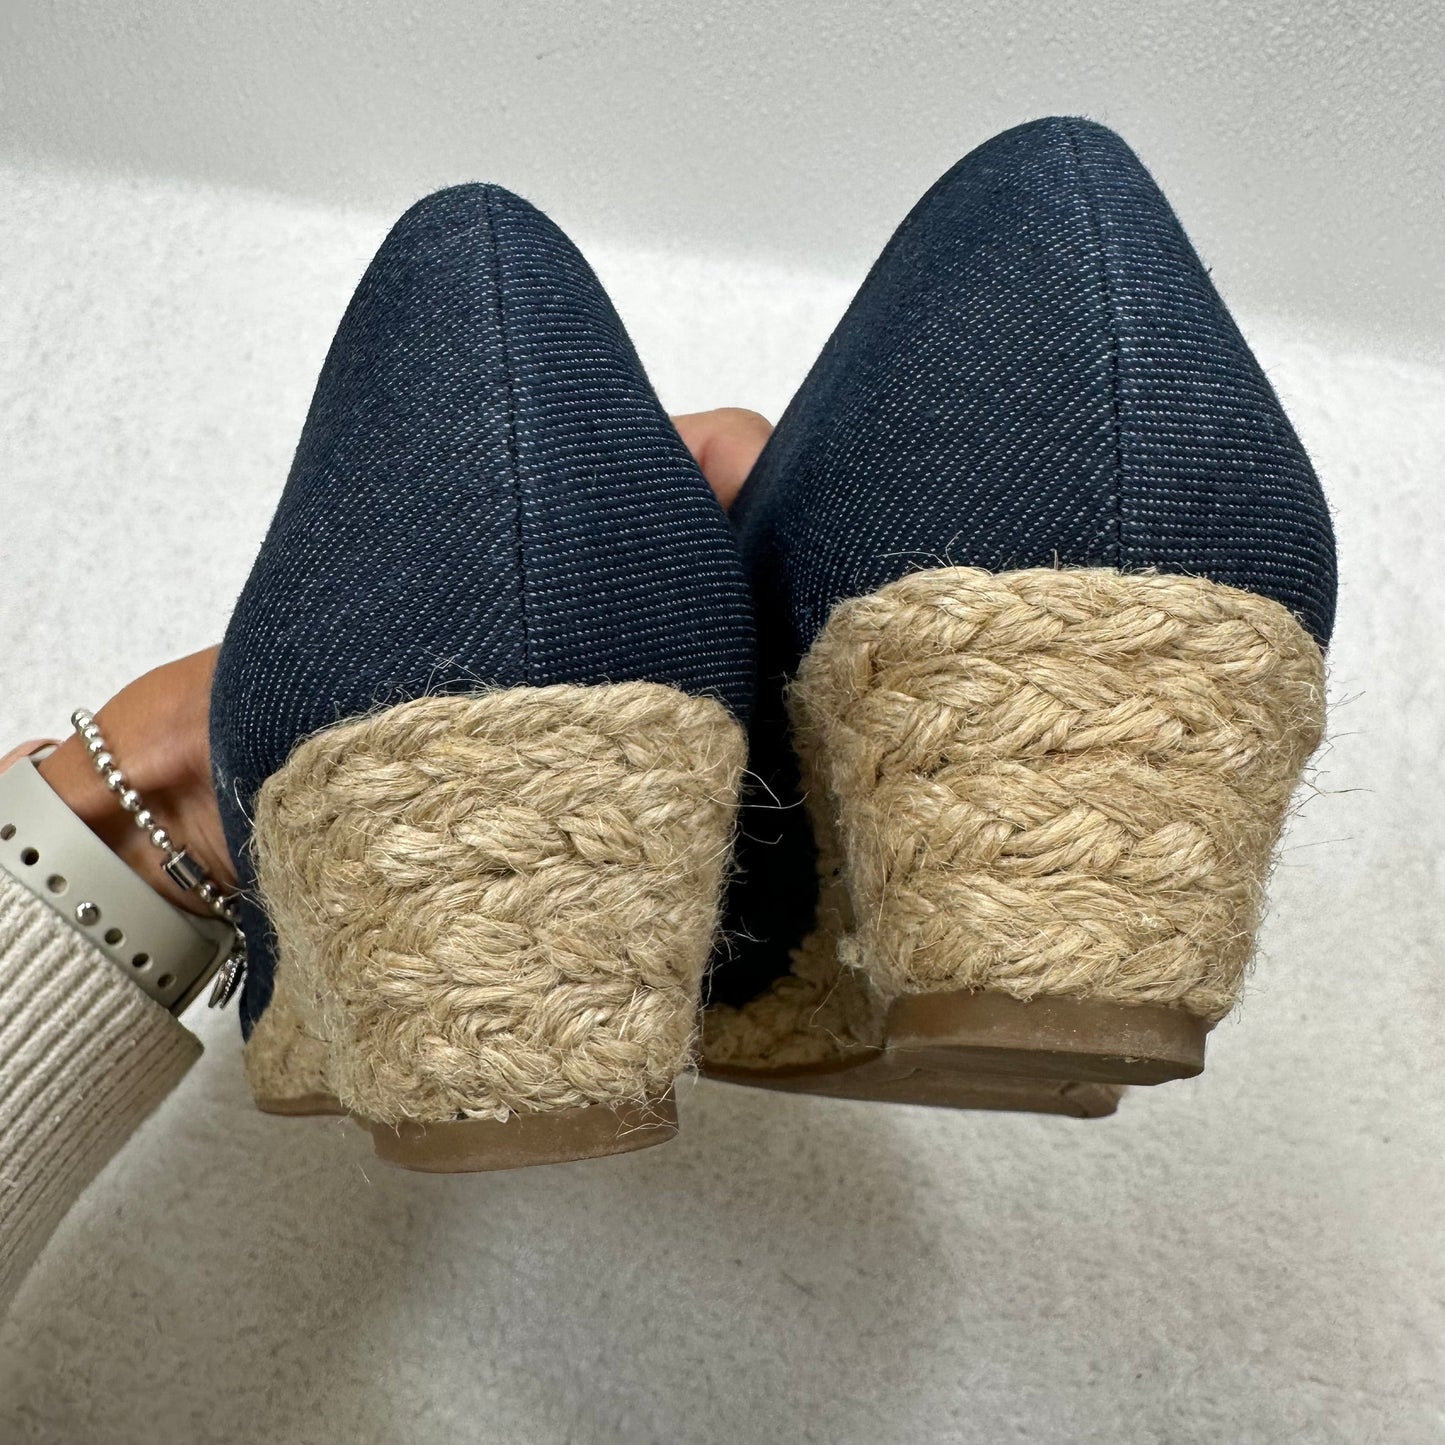 Navy Shoes Flats Espadrille Life Stride, Size 9